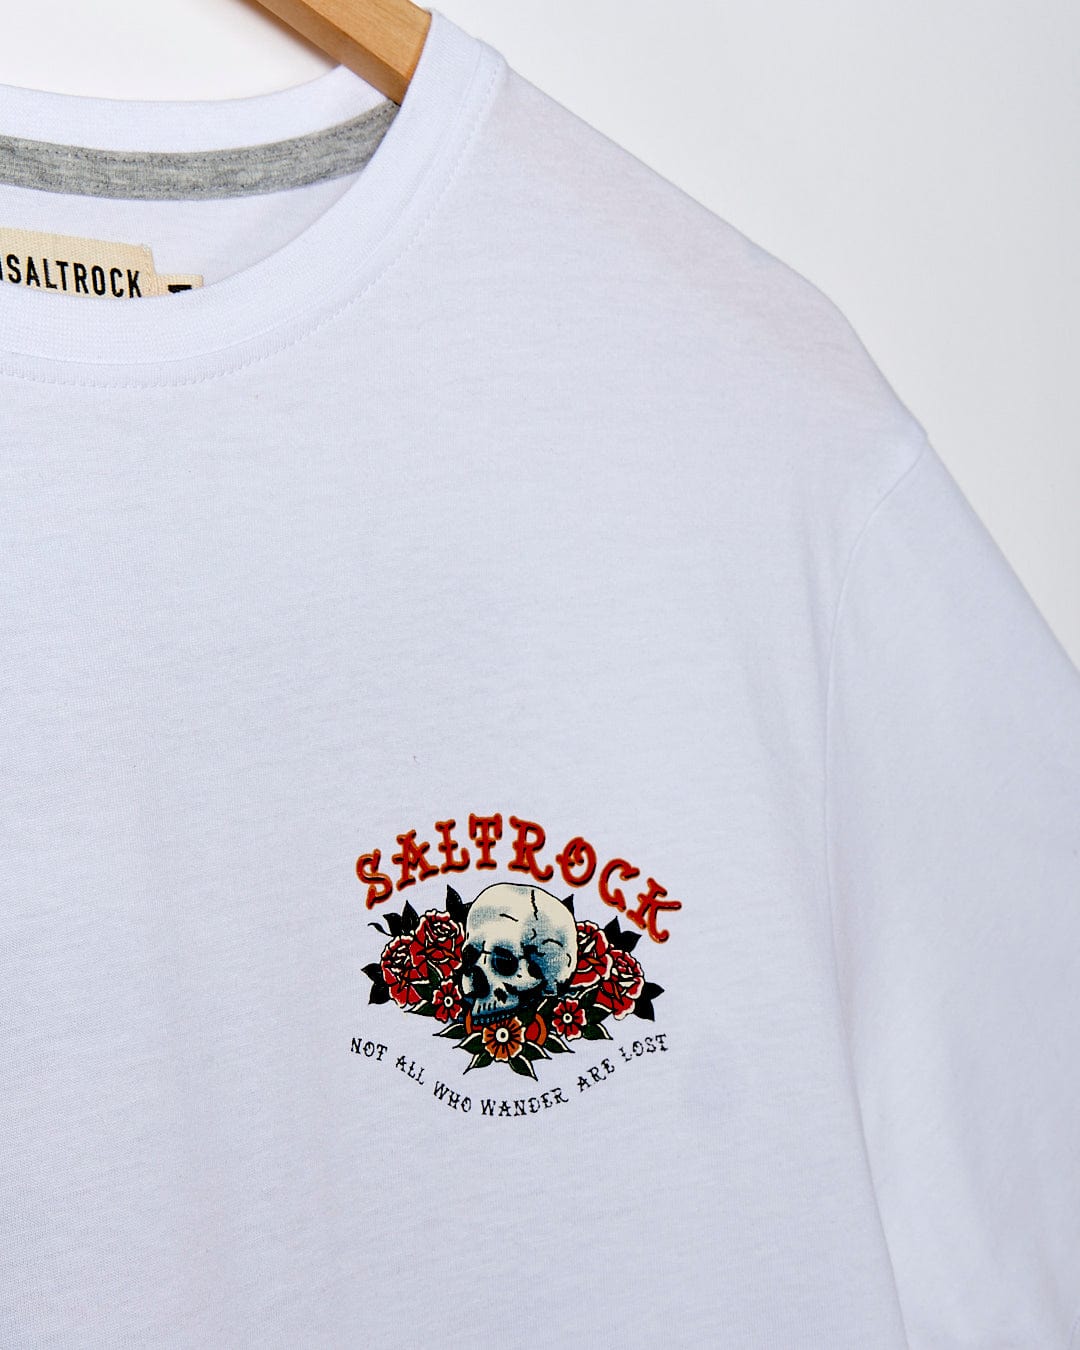 A Tattoo Island - Mens Short Sleeve T-Shirt - White by Saltrock with a skull and roses on it.